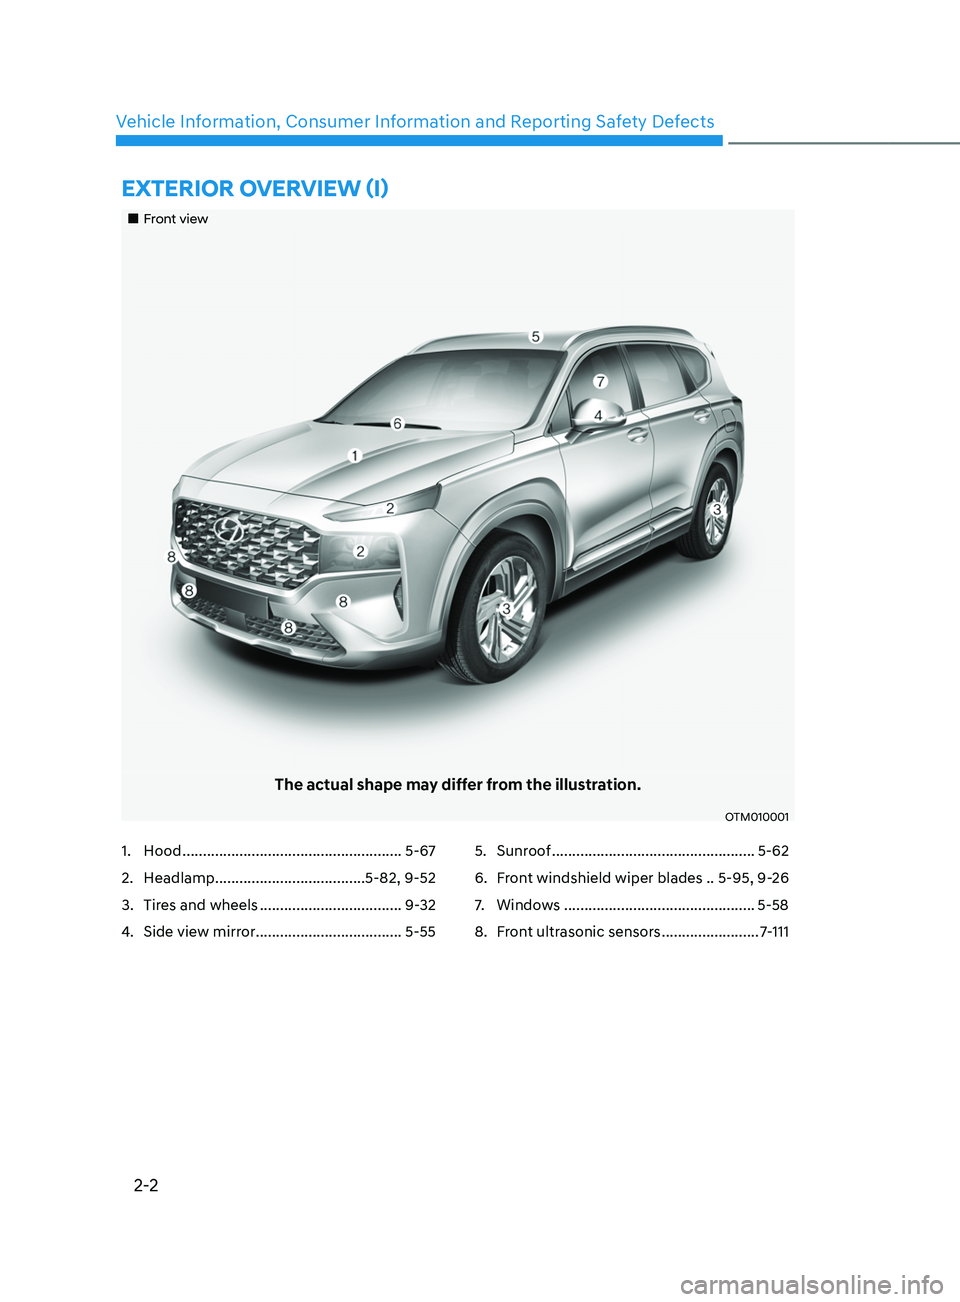 HYUNDAI SANTA FE CALLIGRAPHY 2021 User Guide 2-2
Vehicle Information, Consumer Information and Reporting Safety Defects
ExTERIOR OVERVIEW (I)
„„Front view
The actual shape may differ from the illustration.
OTM010001
1. Hood ...........